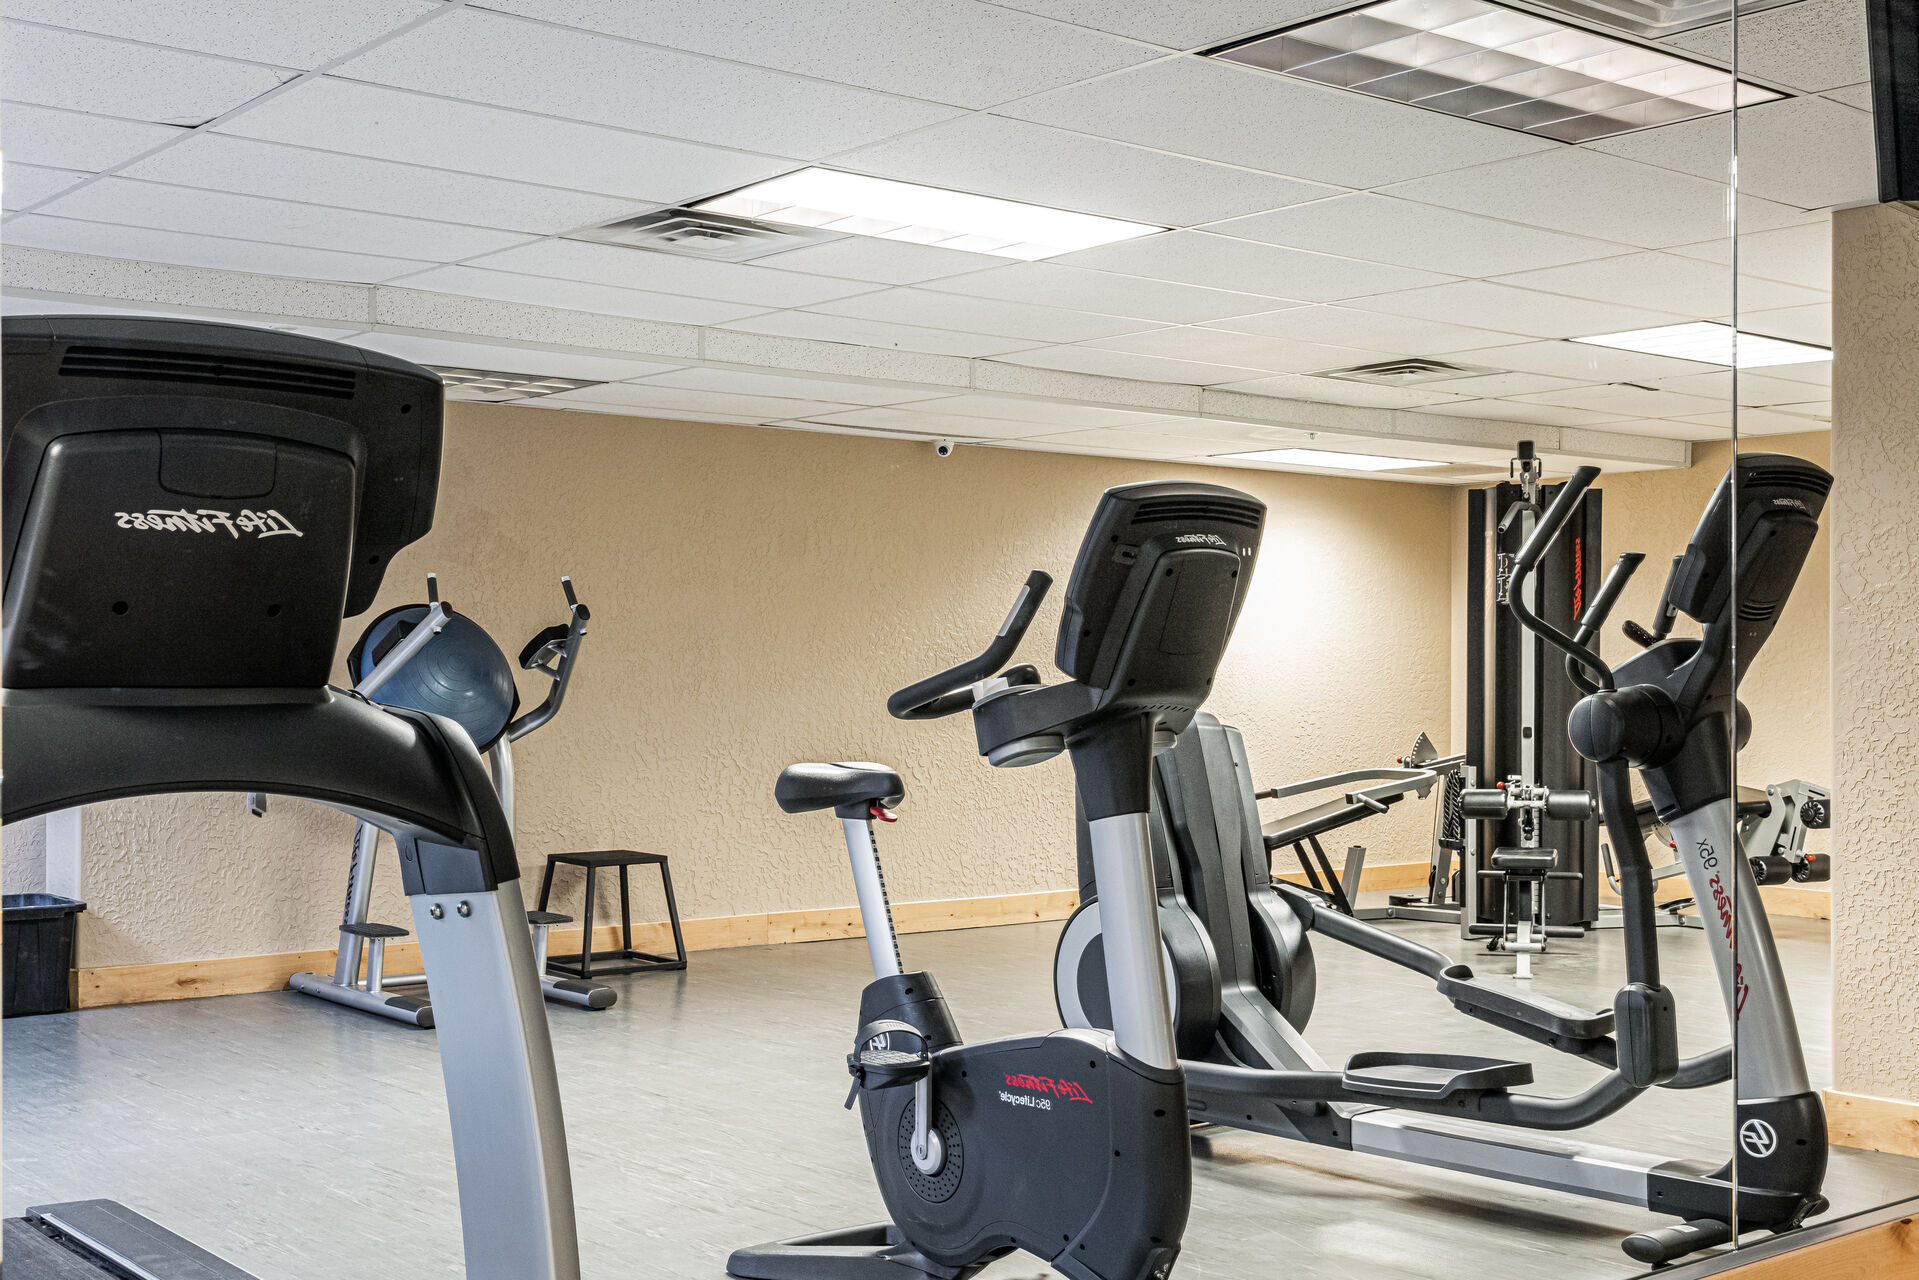 Community fitness center features multiple cardio options